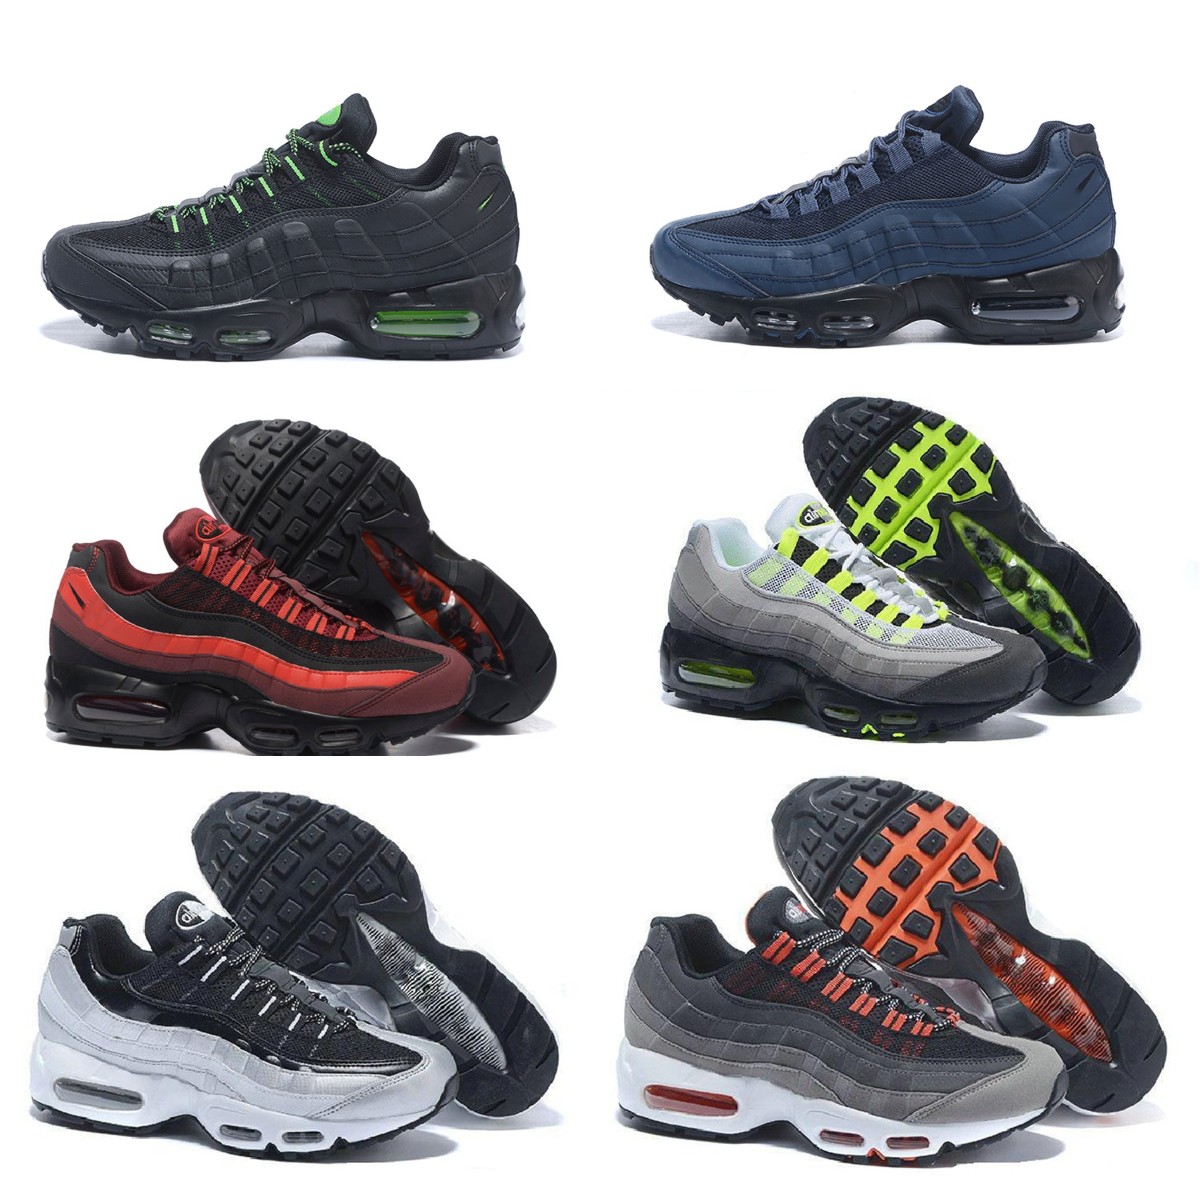 

Top Quality Mens Running Casual Shoes Yin Yang OG Airs Solar Triple Black White Worldwide 95 Seahawks Particle Grey Neon Laser Fuchsia Red Greedy 3.0 Sports Sneakers N8, Please contact us